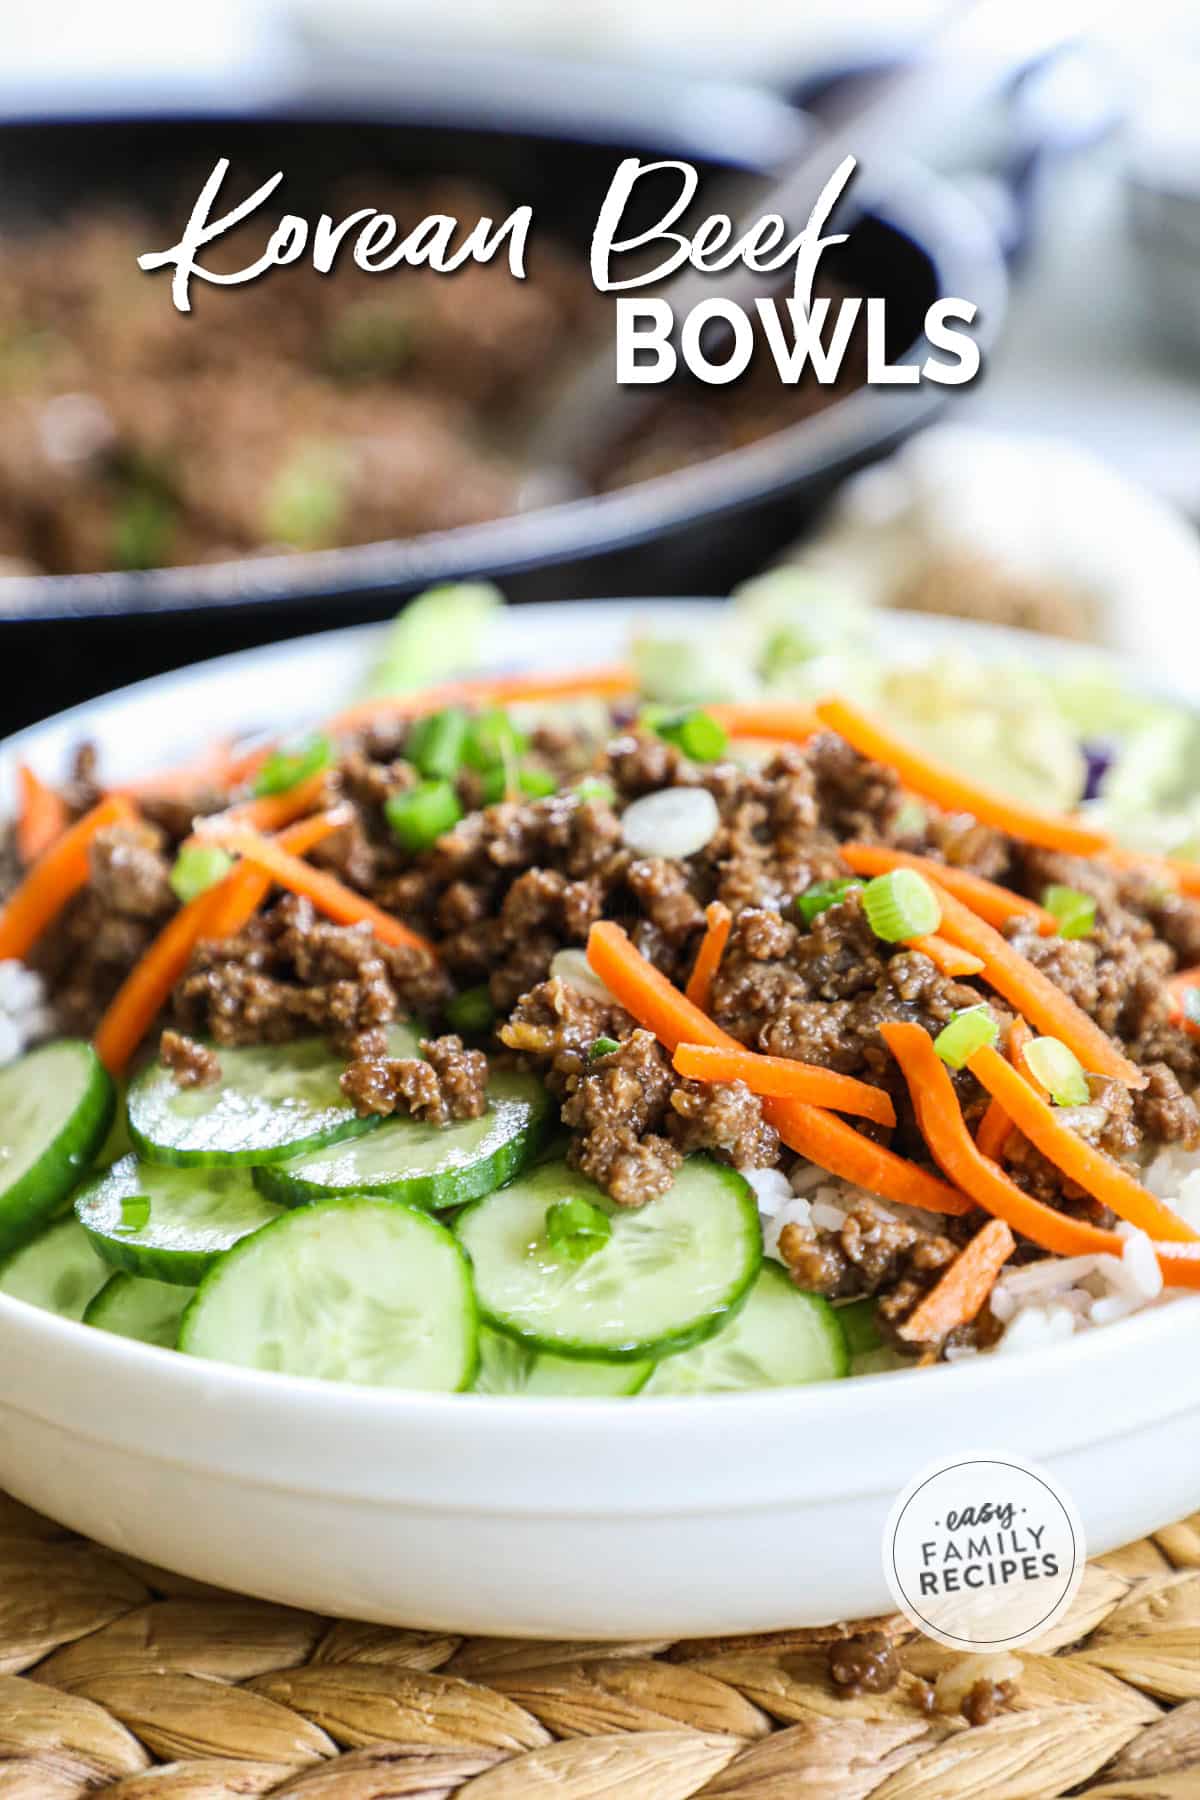 Completed korean beef bowl with rice, cucumbers, beef, and carrots.